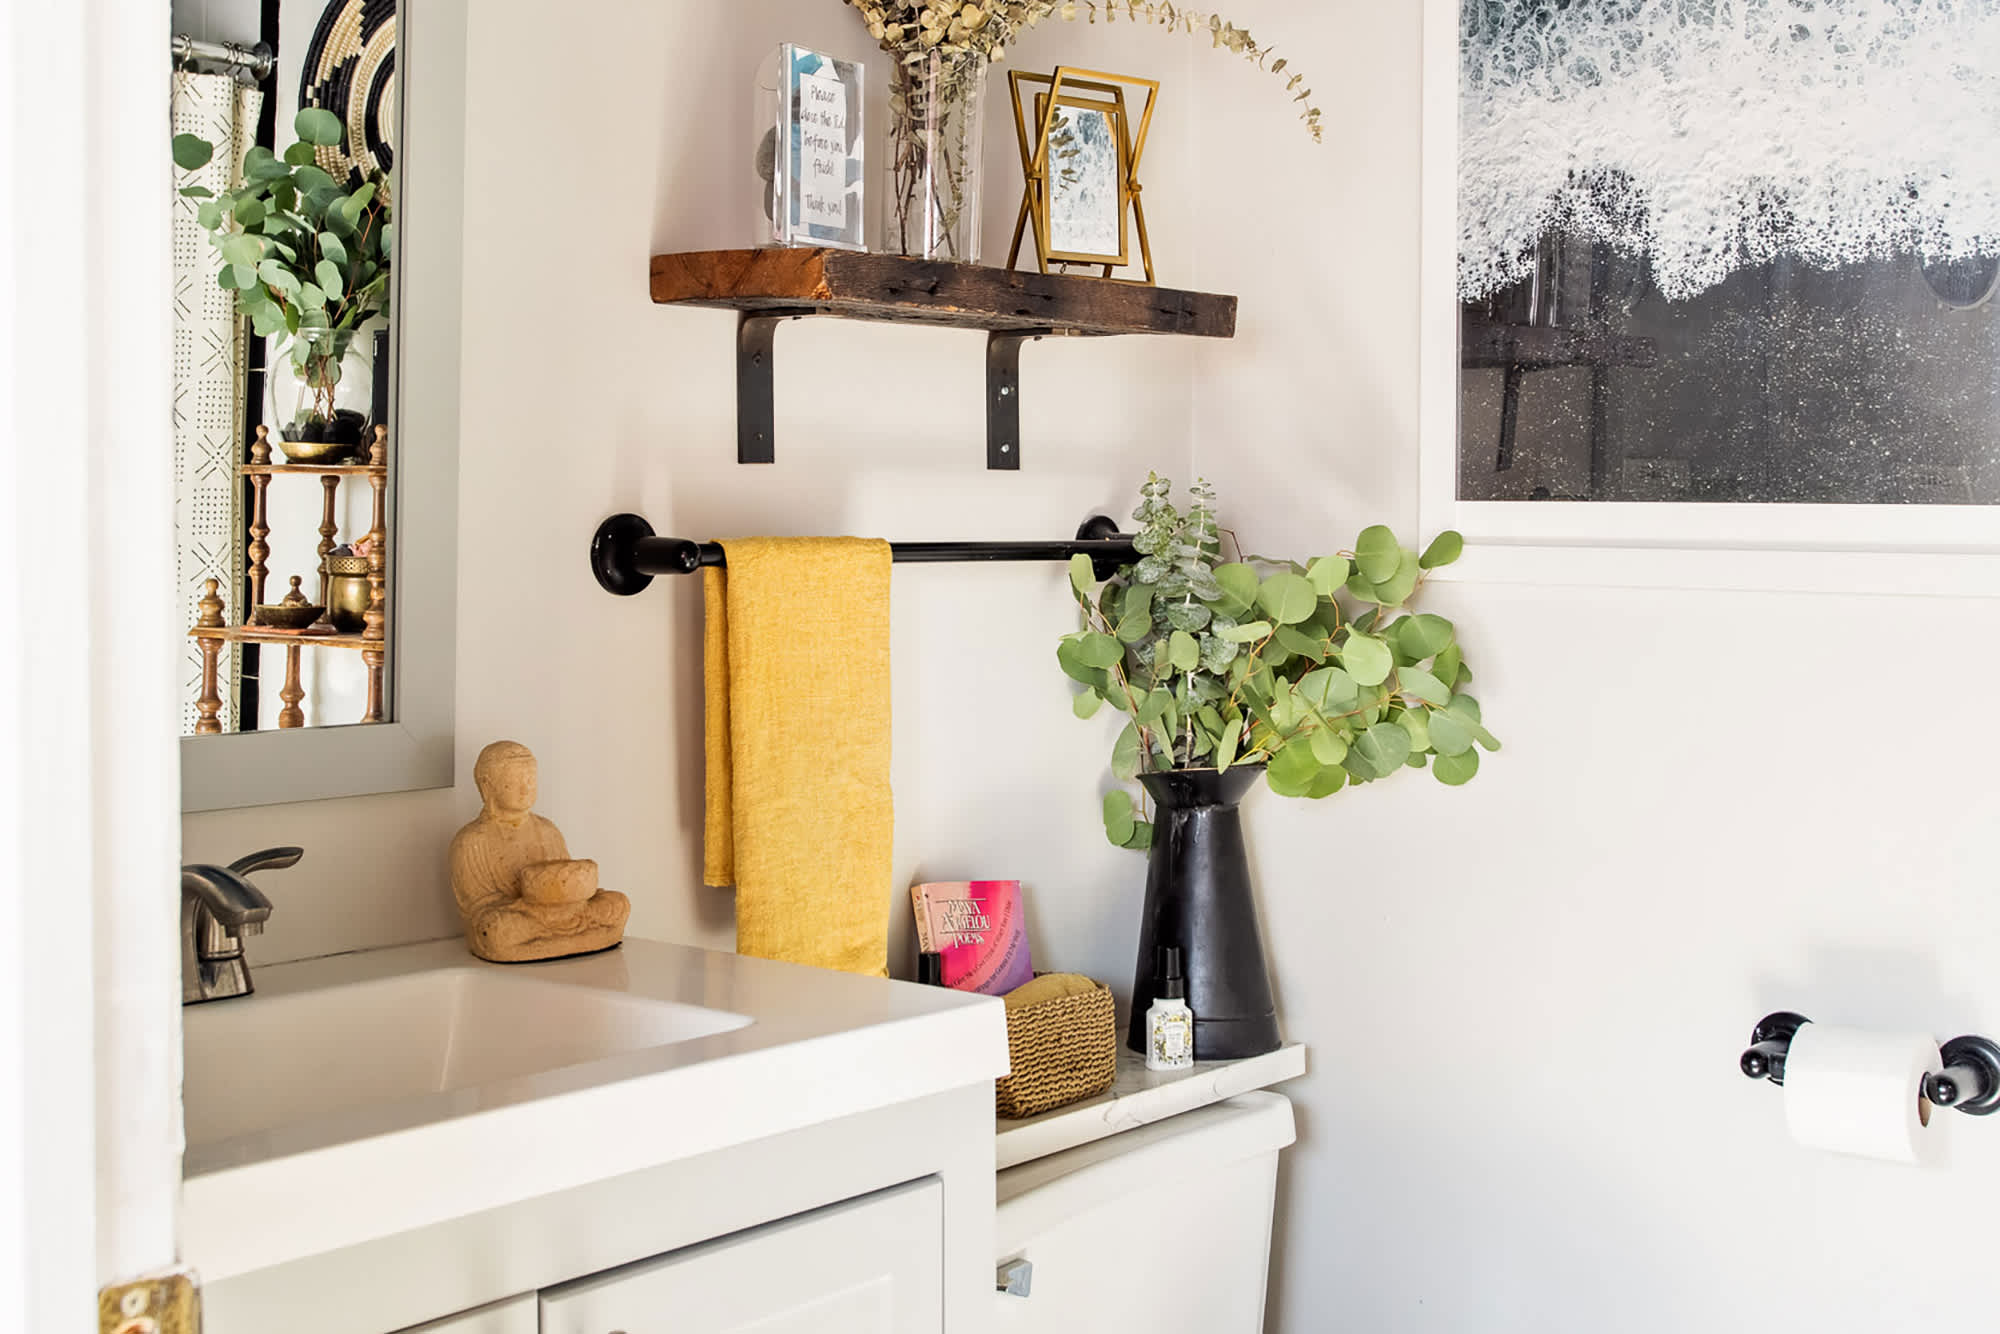 5 Steps to Styling Bathroom Shelves That Don't Look Cluttered